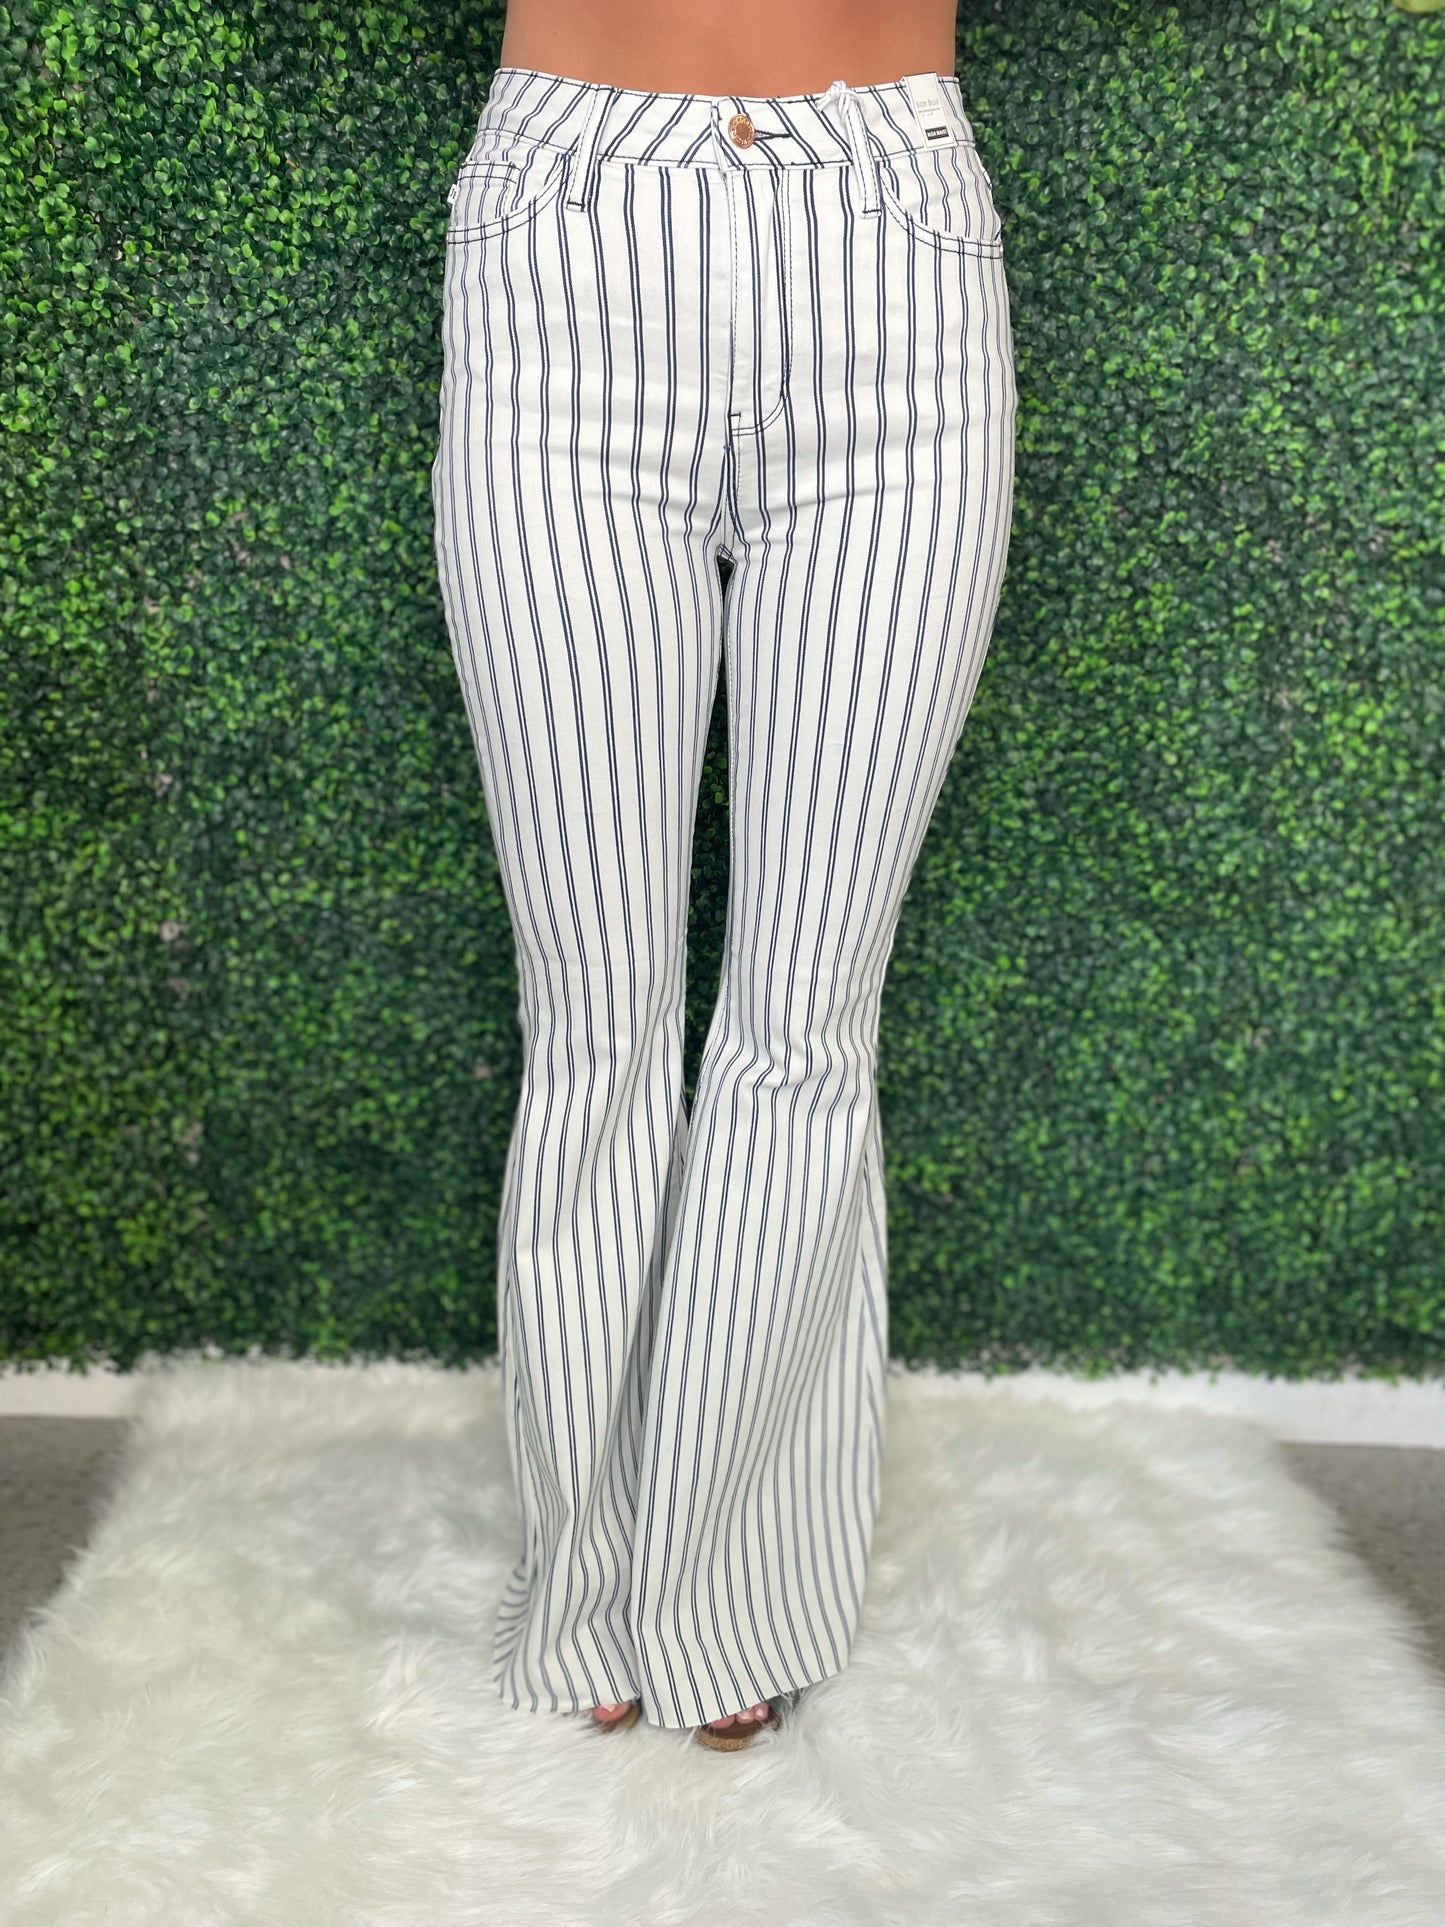 Babe Striped Bell Bottoms